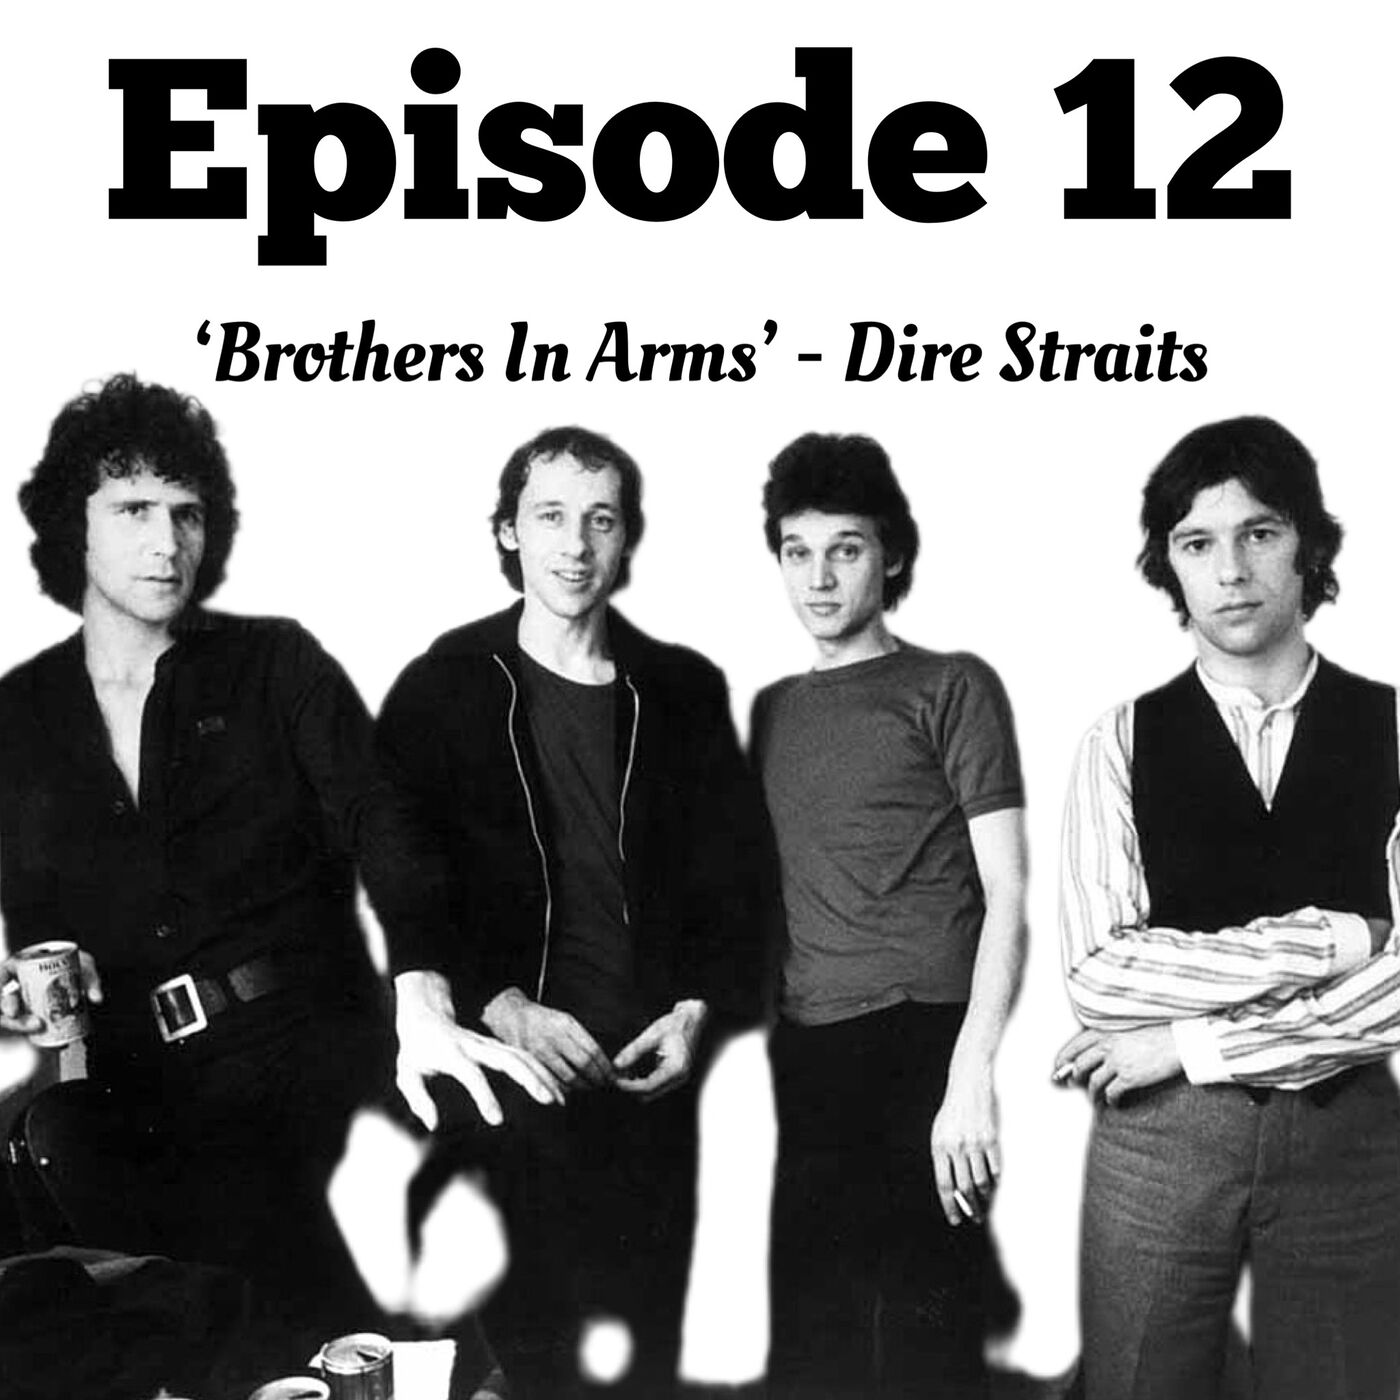 12. ’Brothers In Arms’ - Dire Straits (1985)